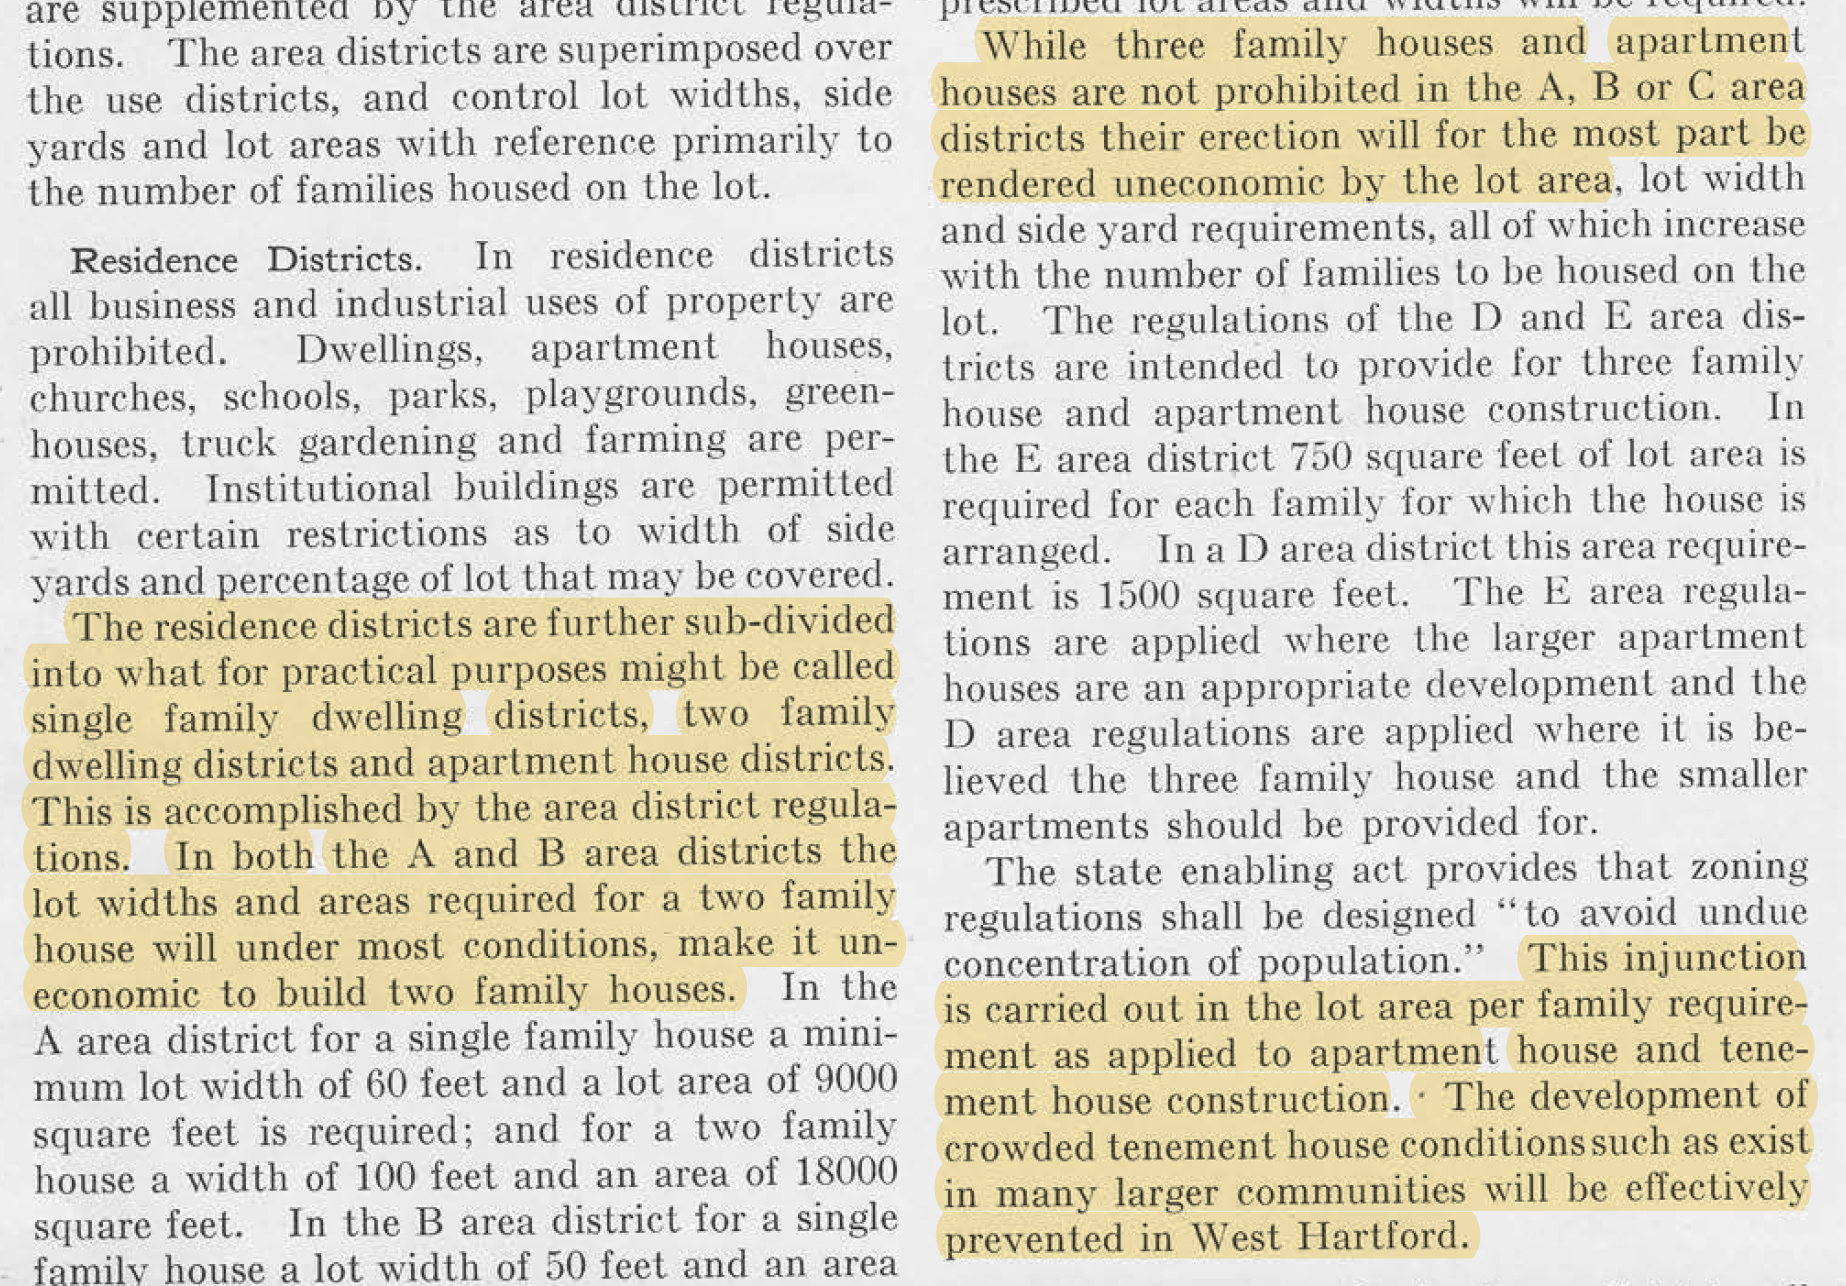 Whitten’s zoning plan for West Hartford demonstrated how local governments could create minimum-land rules that made it “uneconomic” for private real estate developers to build multi-family housing in areas designated for single-family homes, thereby creating powerful incentives for exclusion. Source: West Hartford Zoning, 1924, hosted by Google Books.